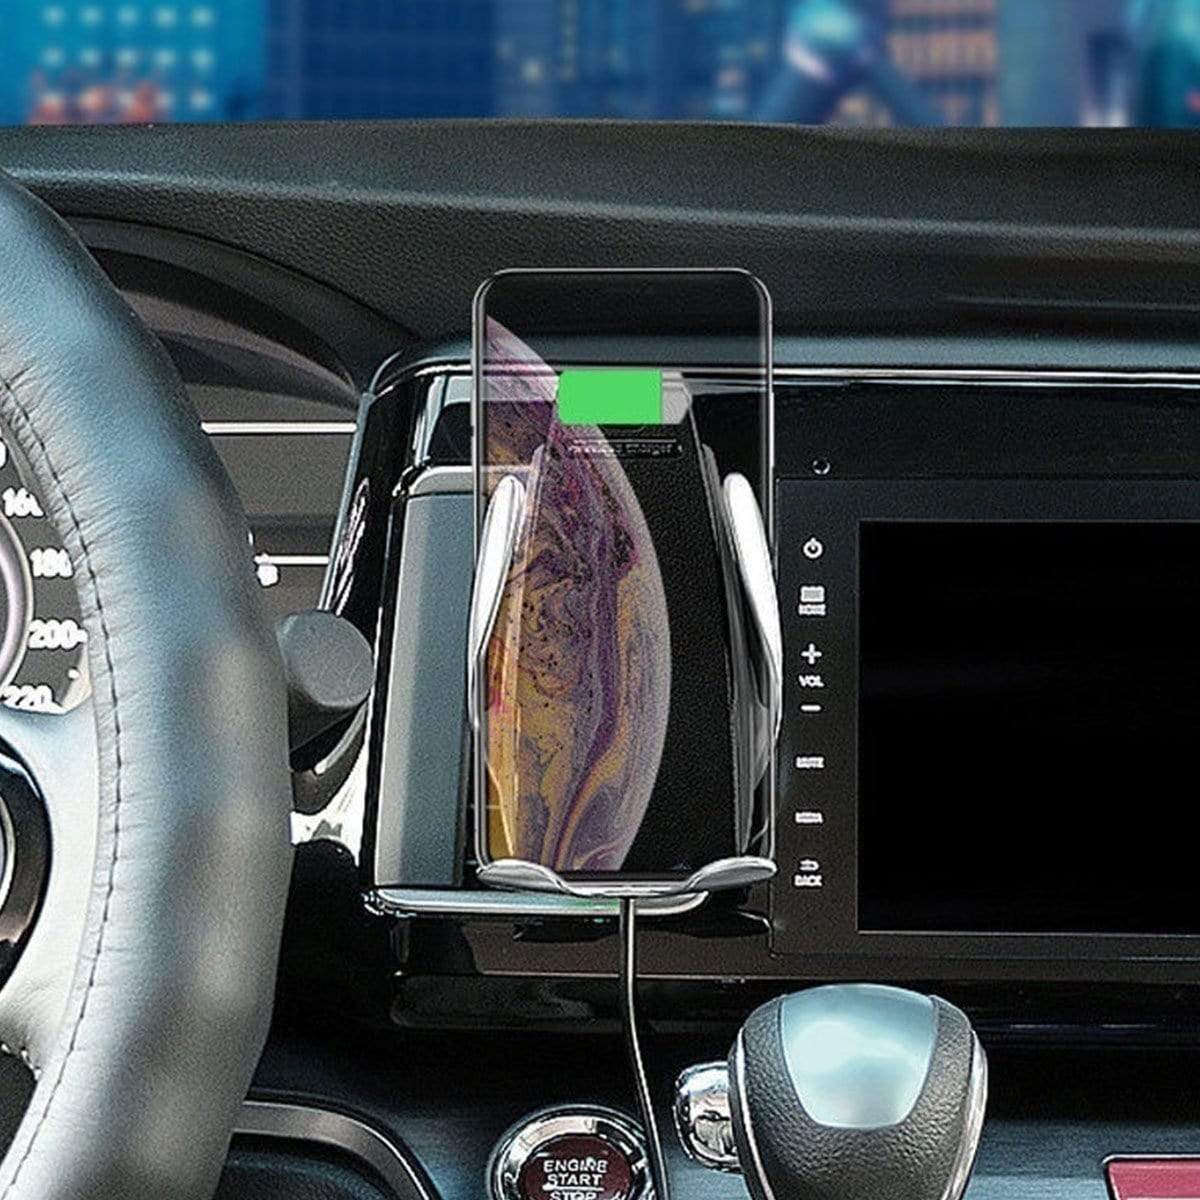 Tech Gimmicks Mobile Accessories Automatic Clamping Car Phone Holder Wireless Charging Car charger Holder Mount Air Vent